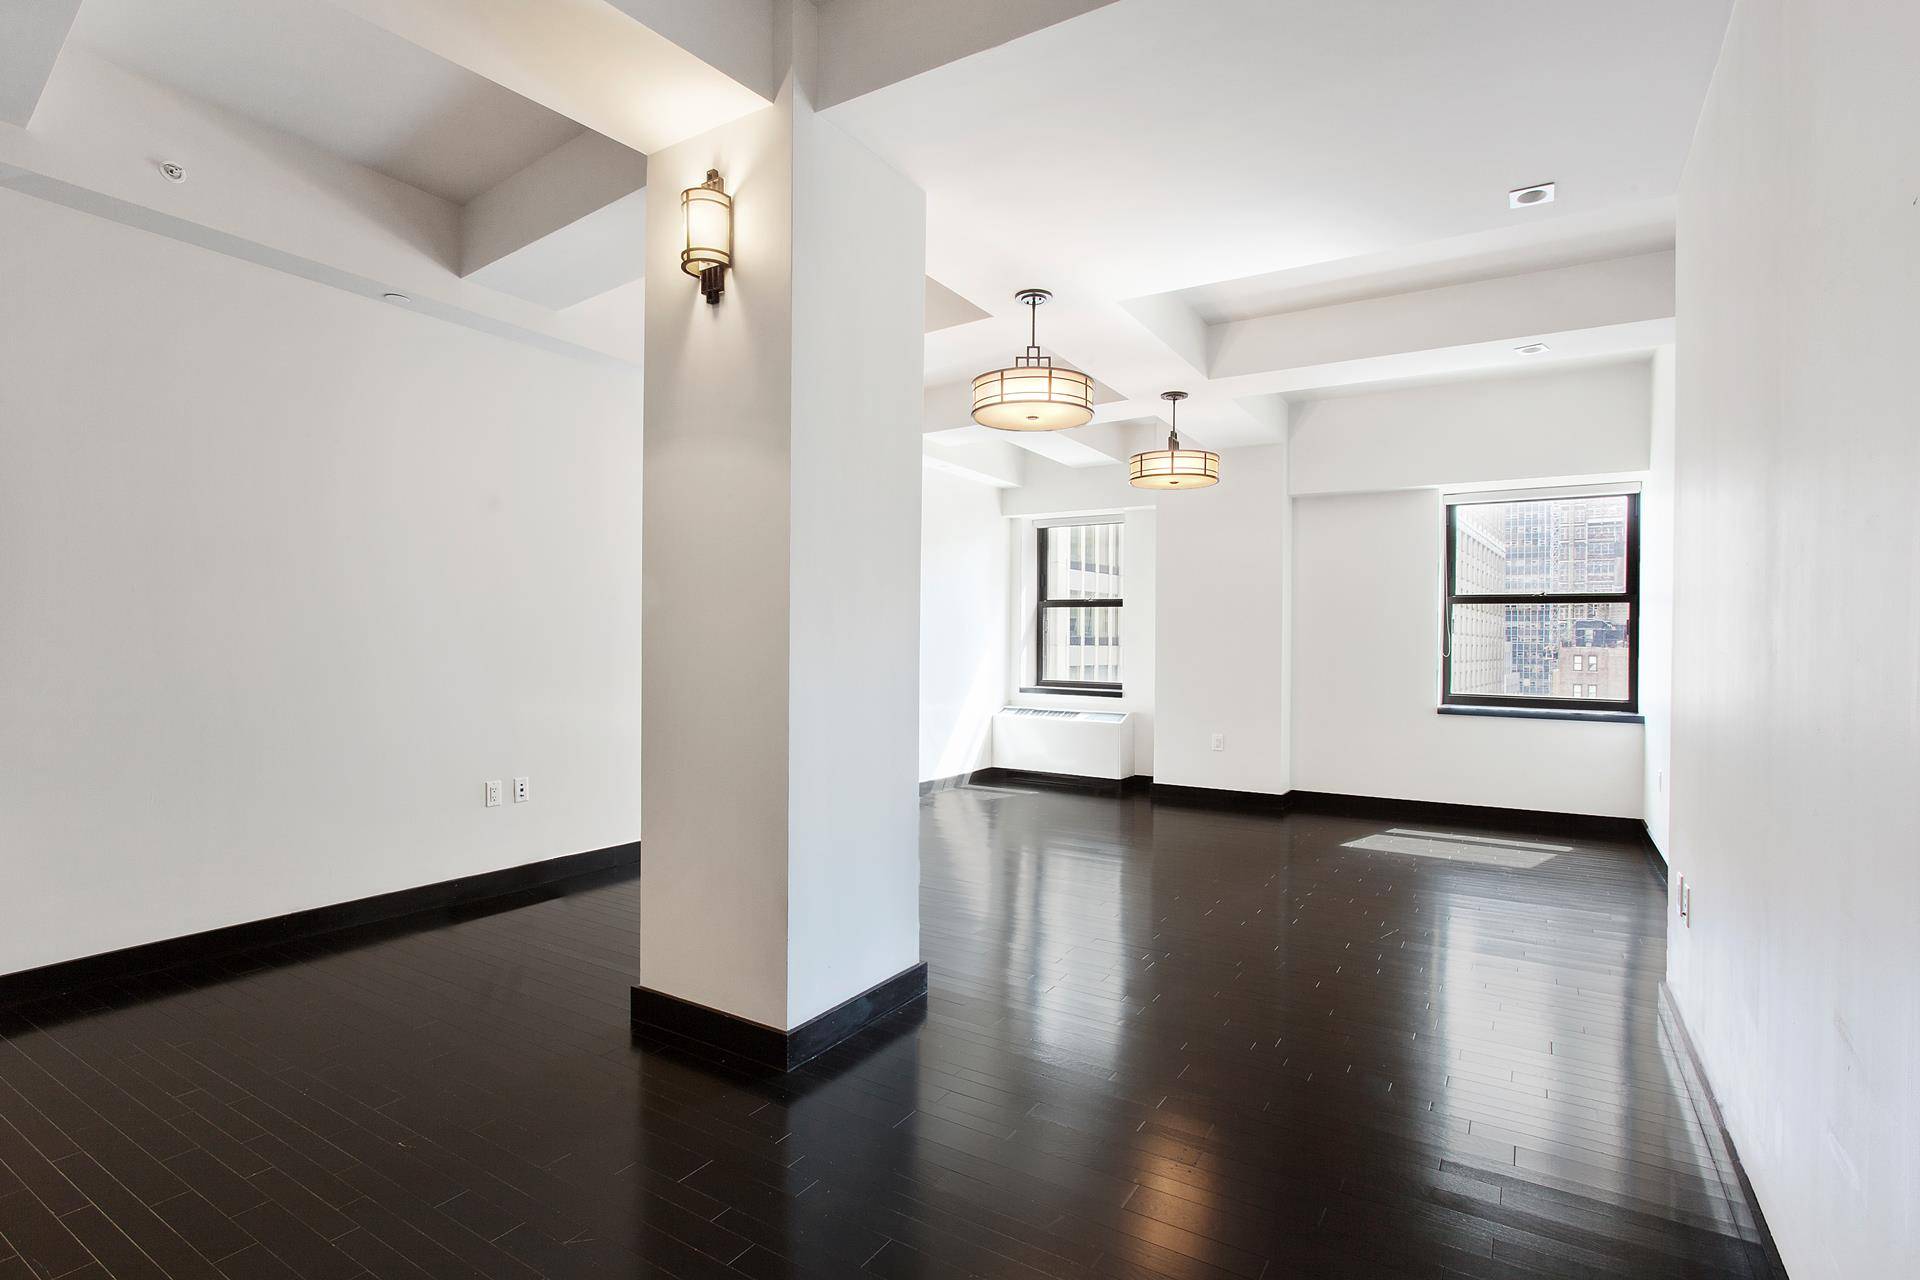 A gorgeous two bedroom, two bath corner unit with incredible northern and eastern exposure situated in what is considered one of the most luxurious condominiums in Lower Manhattan.